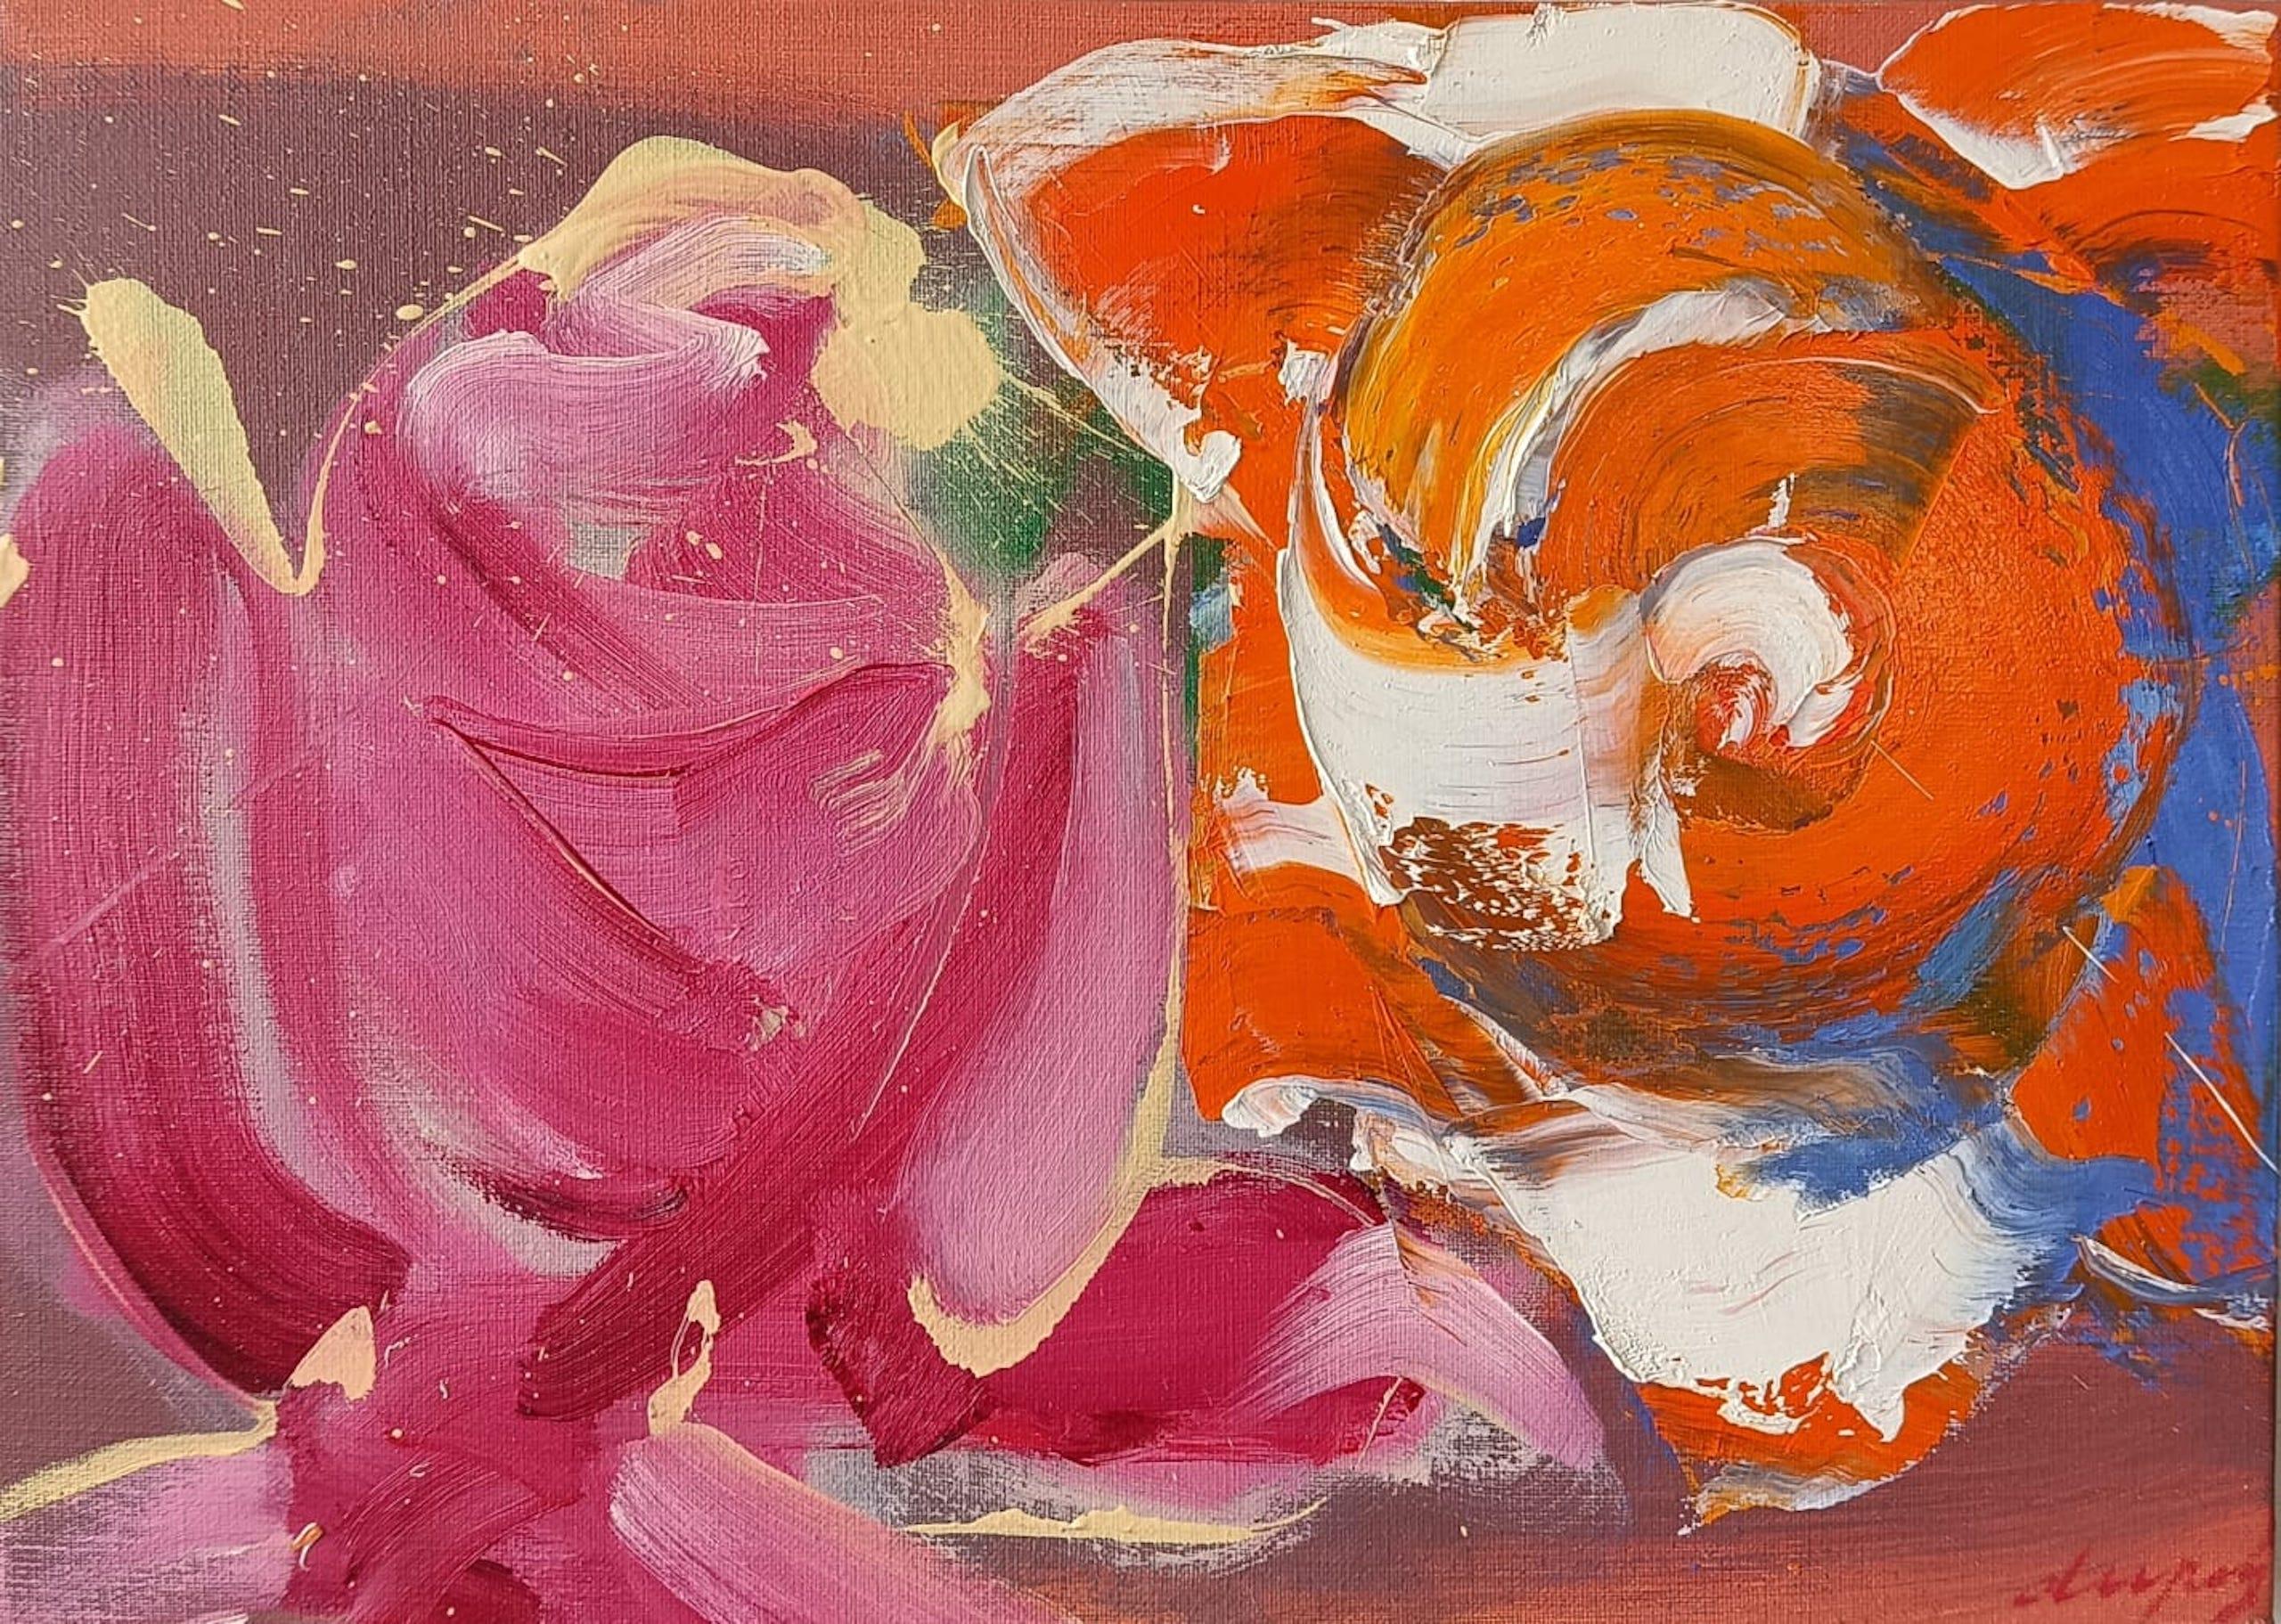 Garden Roses is a unique oil on canvas painting by contemporary artist Christophe Dupety, dimensions are 33 × 46 cm (13 × 18.1 in).
The artwork is signed, sold unframed and comes with a certificate of authenticity.

This series focuses on floral